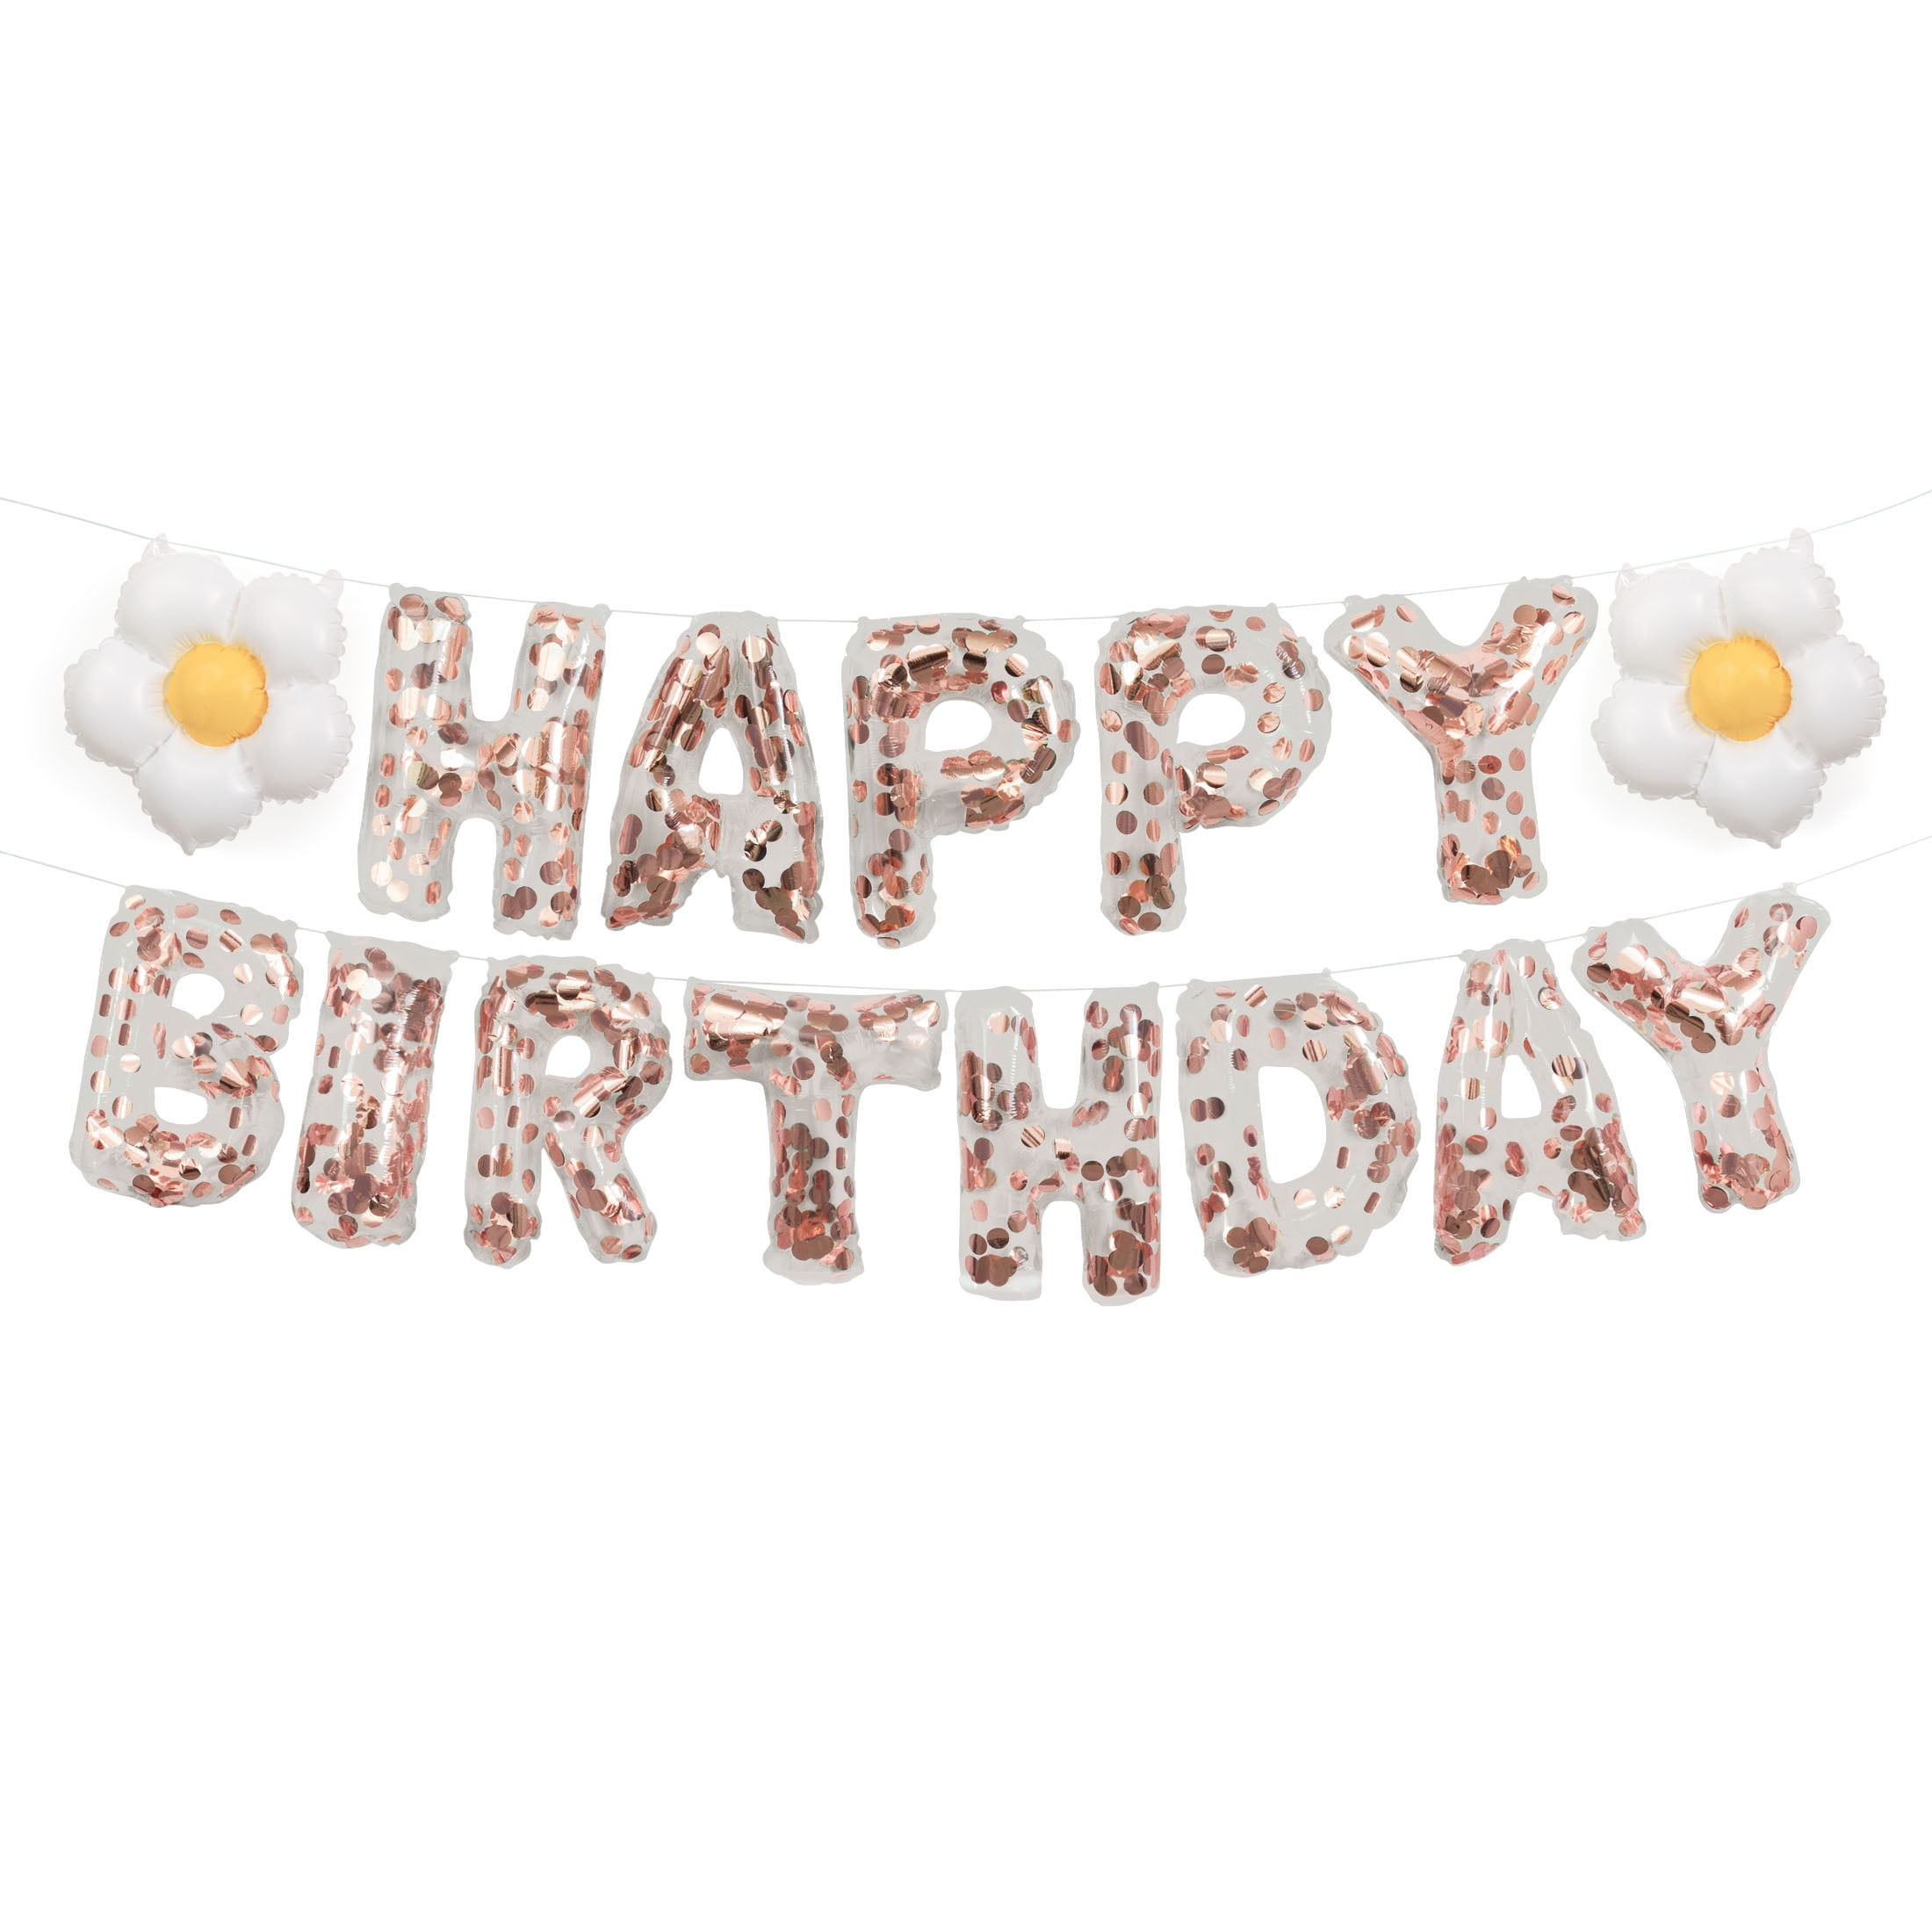 Way to Celebrate! Daisy & Rose Gold Confetti "Happy Birthday" Letter Balloon Banner Kit